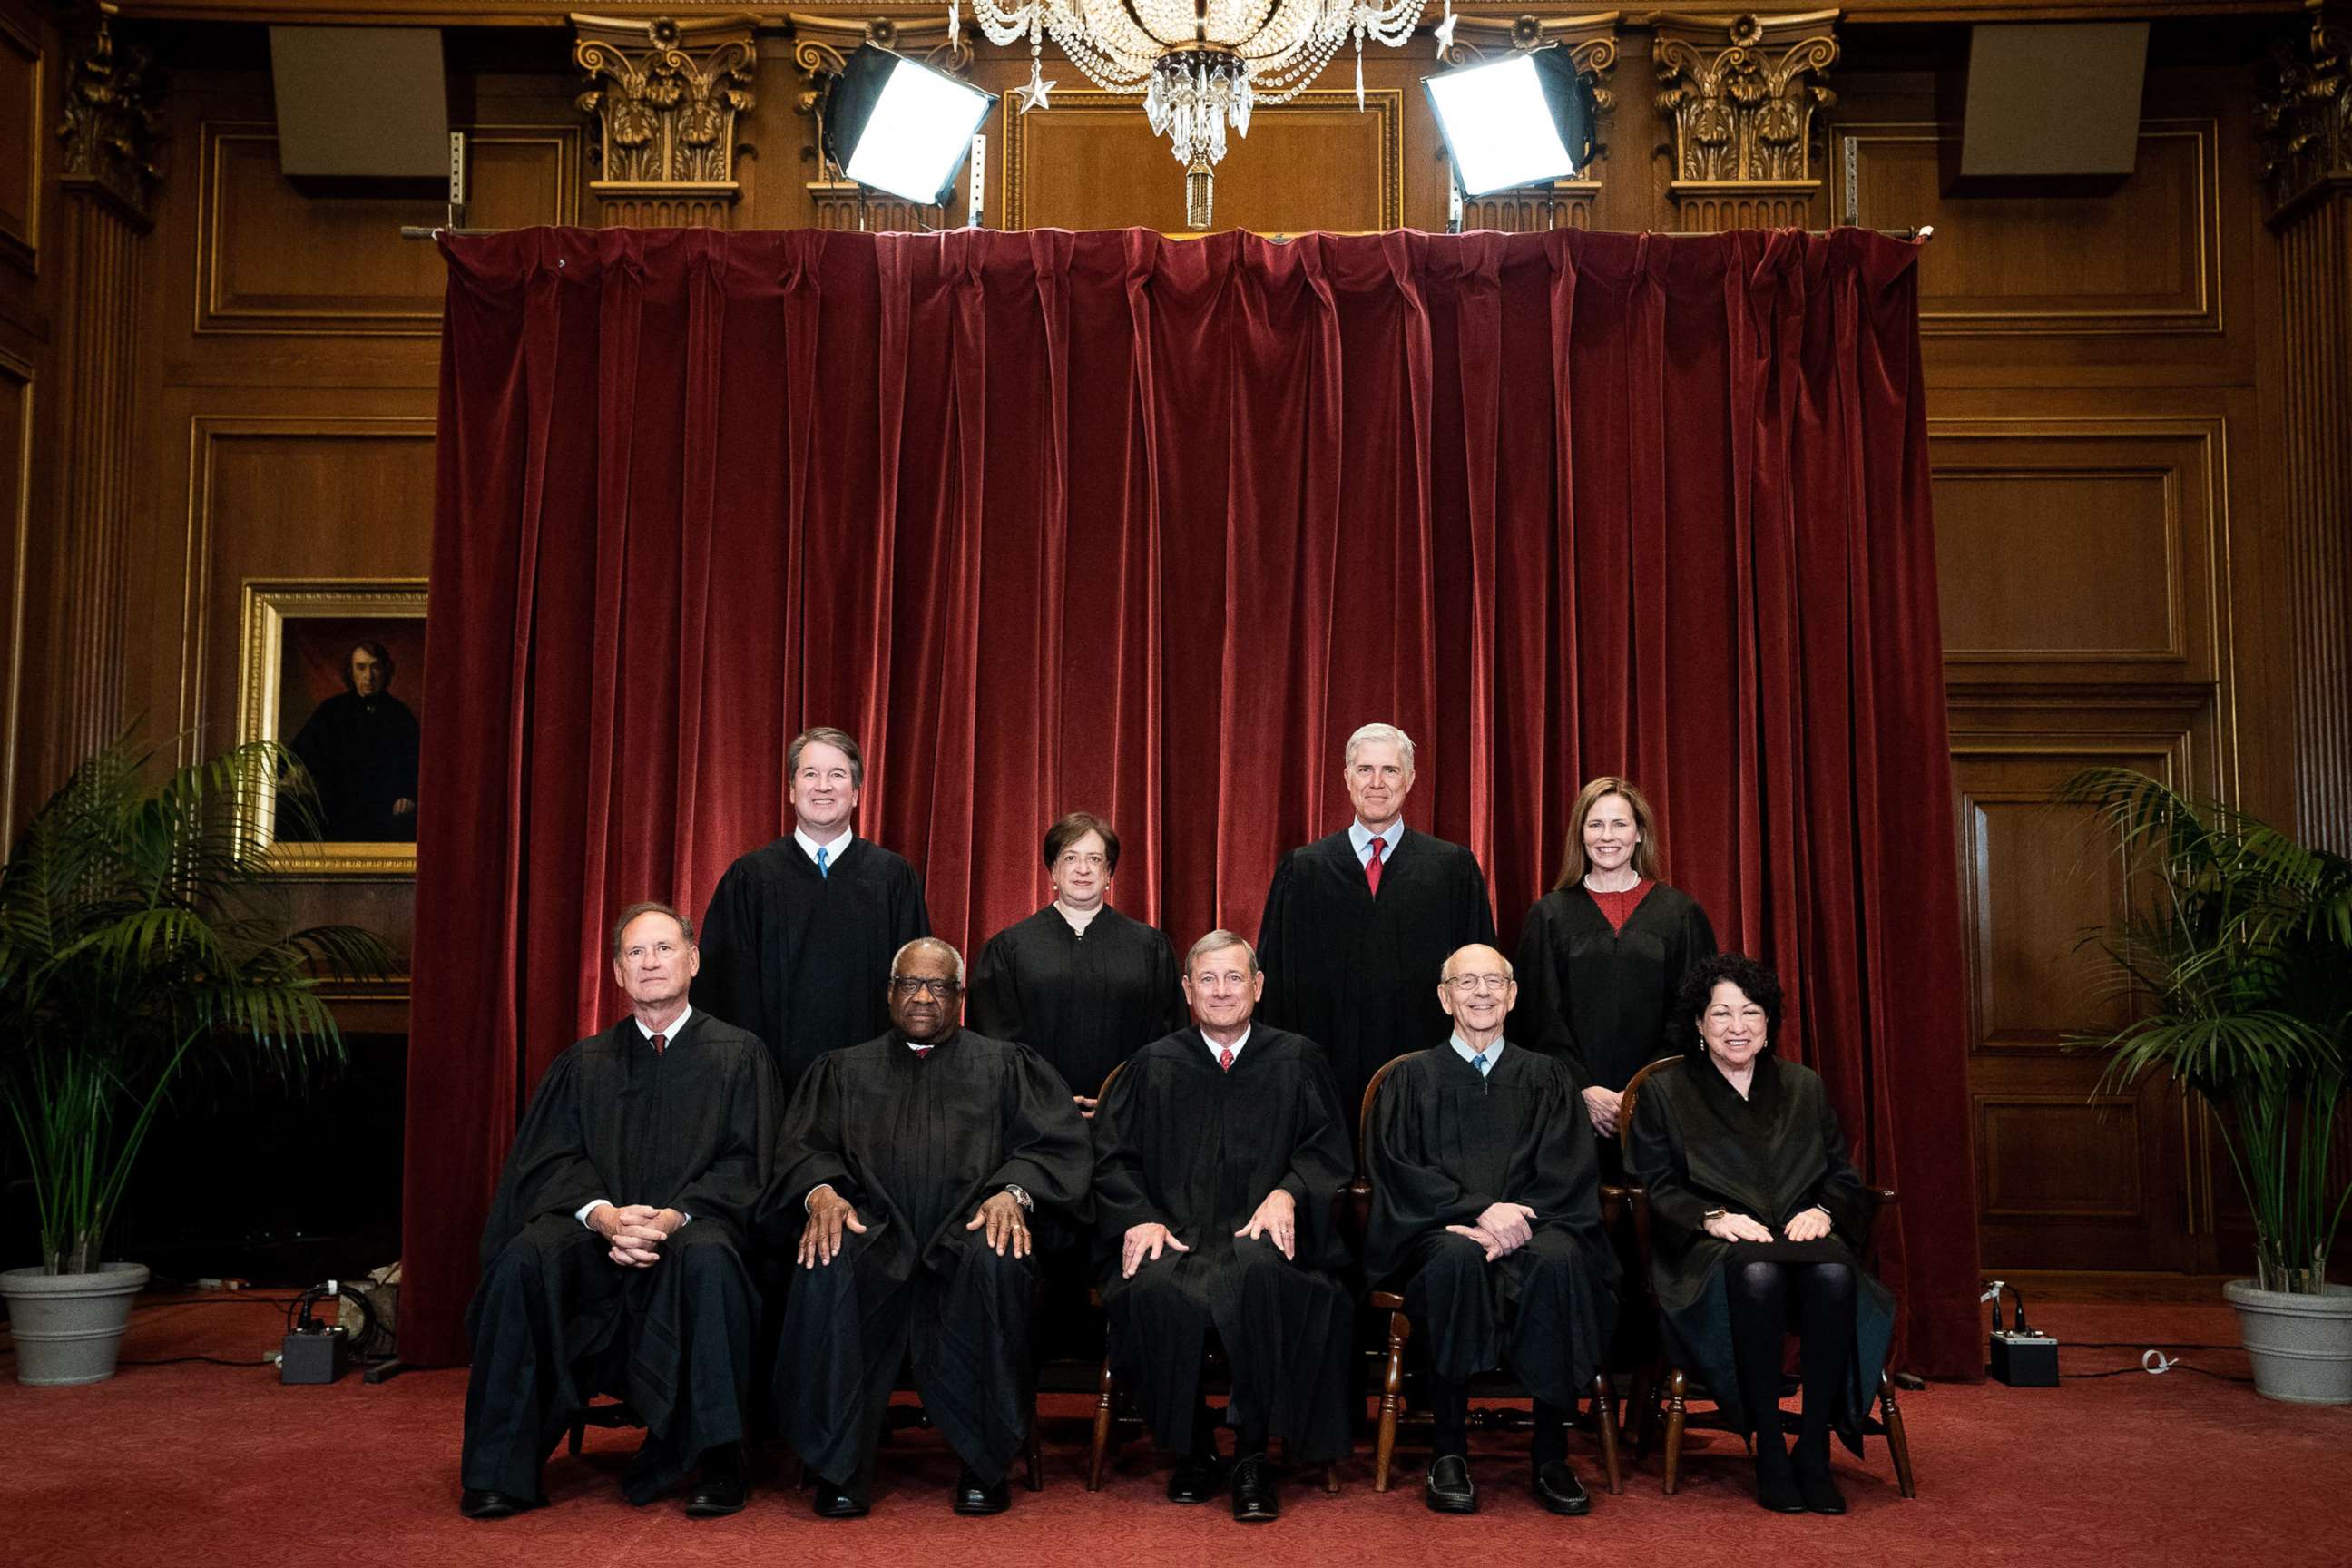 PHOTO: The Justices at the Supreme Court pose for a group portrait in Washington, April 23, 2021.